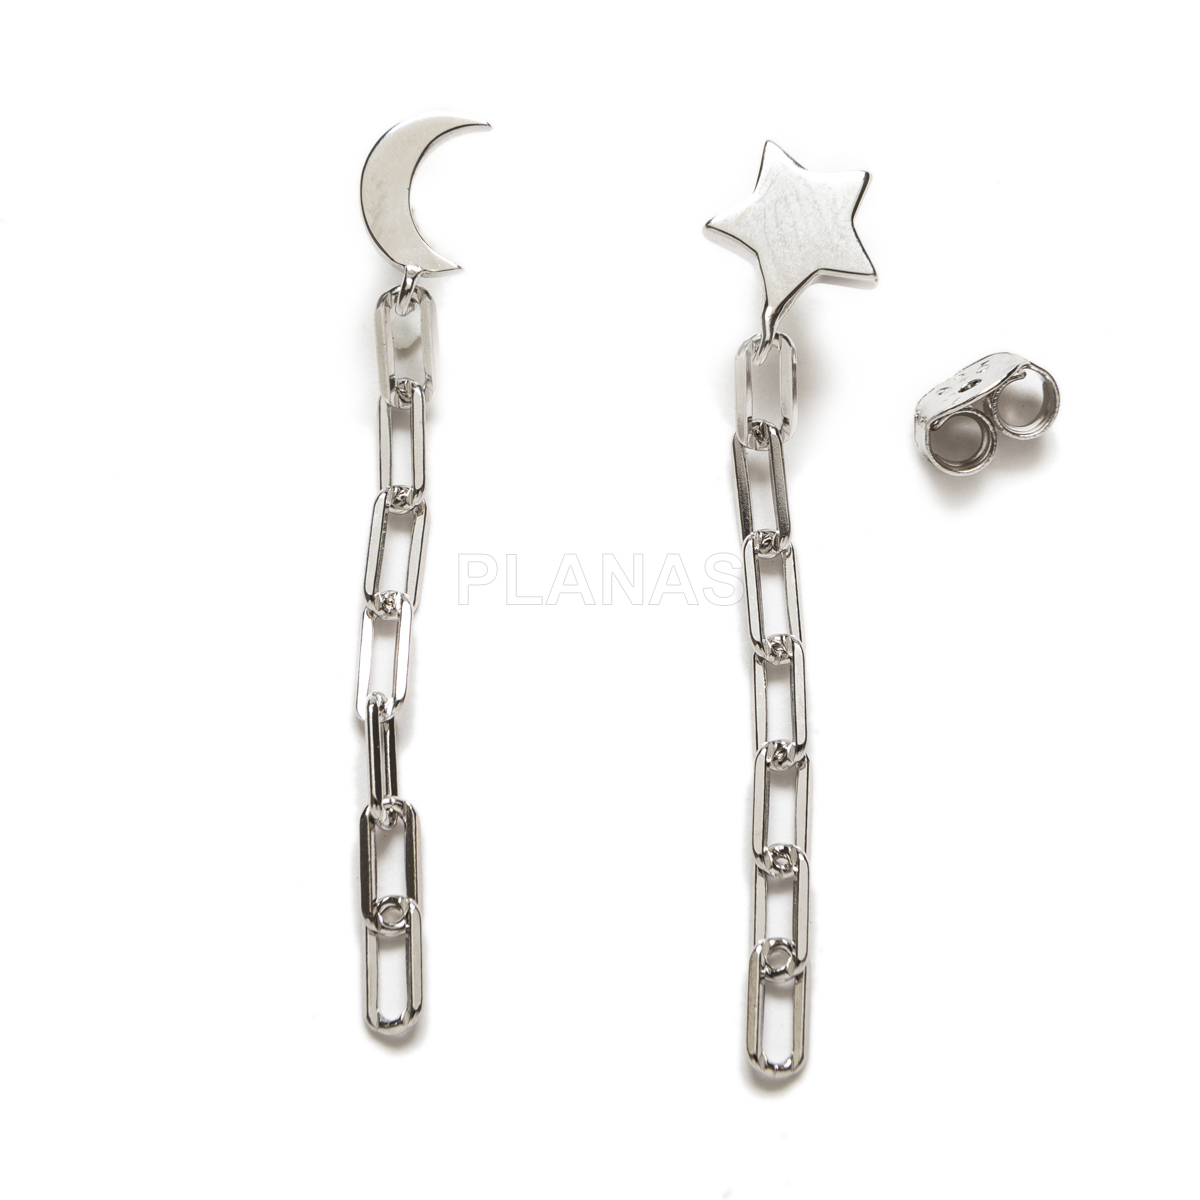 Sterling silver earrings. moon and star.